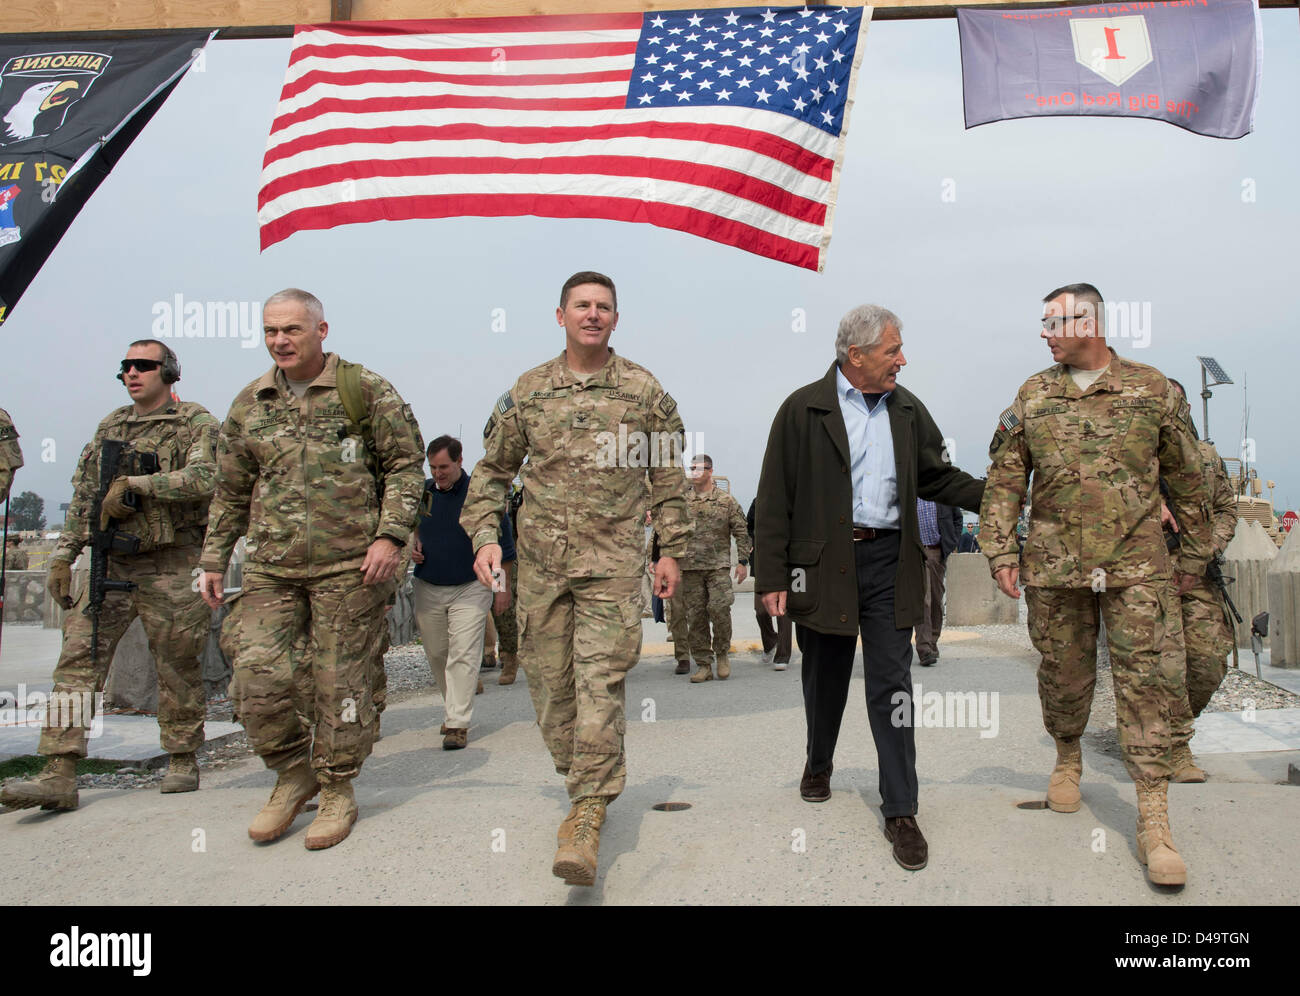 US Secretary of Defense Chuck Hagel walks with Lieutenant General James Terry, Commander ISAF Joint Command, Colonel Joseph McGee, and  Command Sergeant Major Thomas Eppler March 9, 2013 in Jalalabad, Afghanistan. Hagel is in Afghanistan on his first trip as the Secretary of Defense and will meet with US troops, NATO and Afghan leaders. Stock Photo